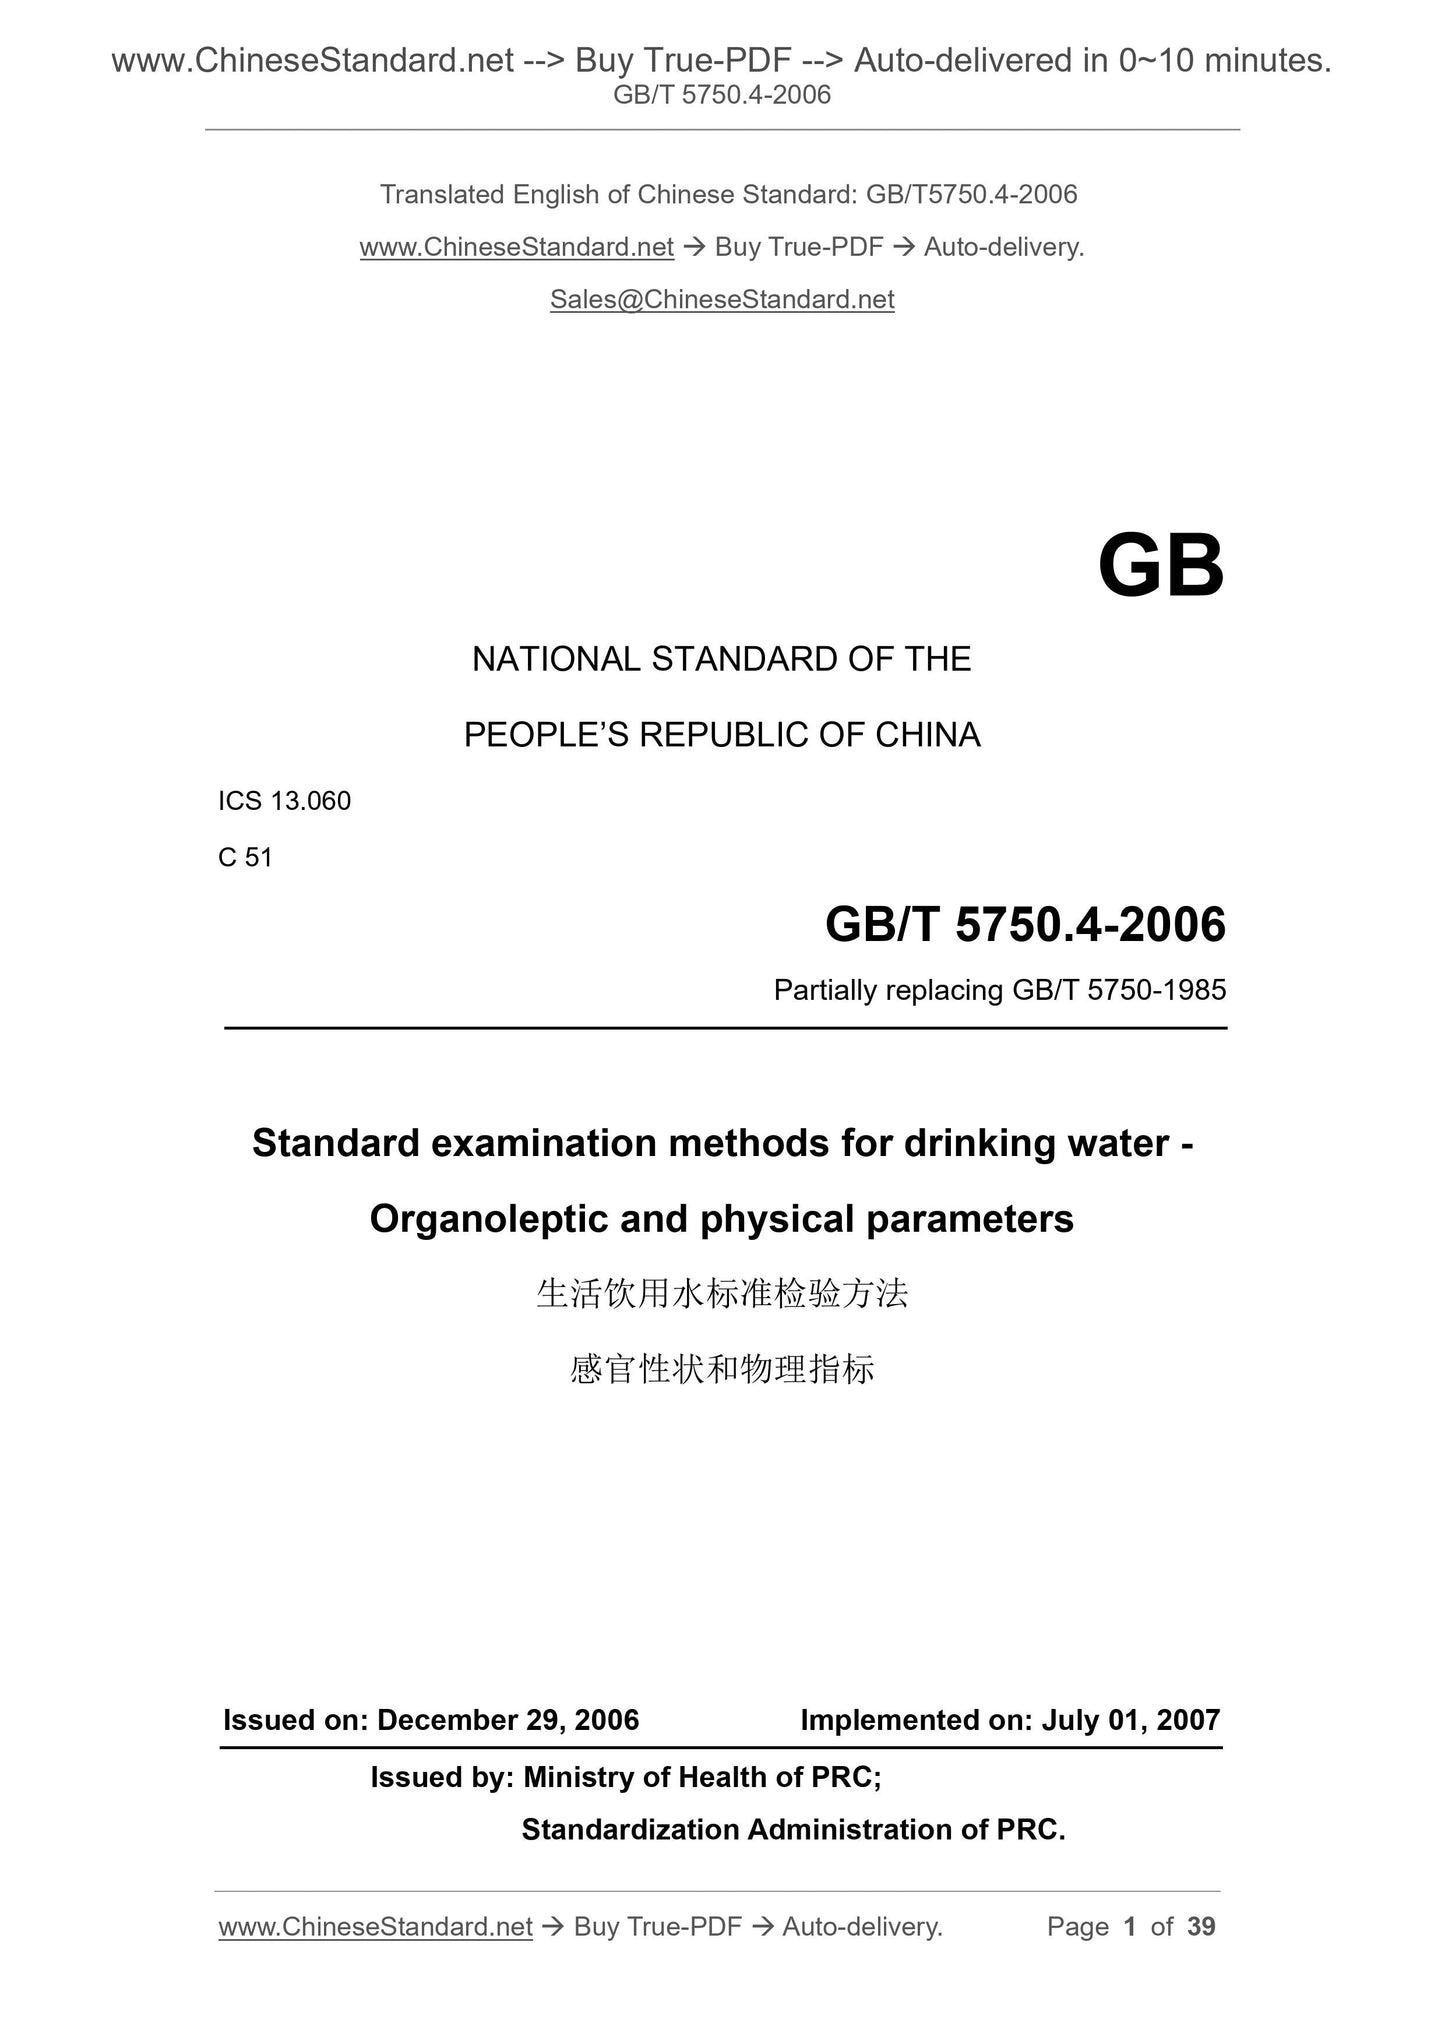 GB/T 5750.4-2006 Page 1